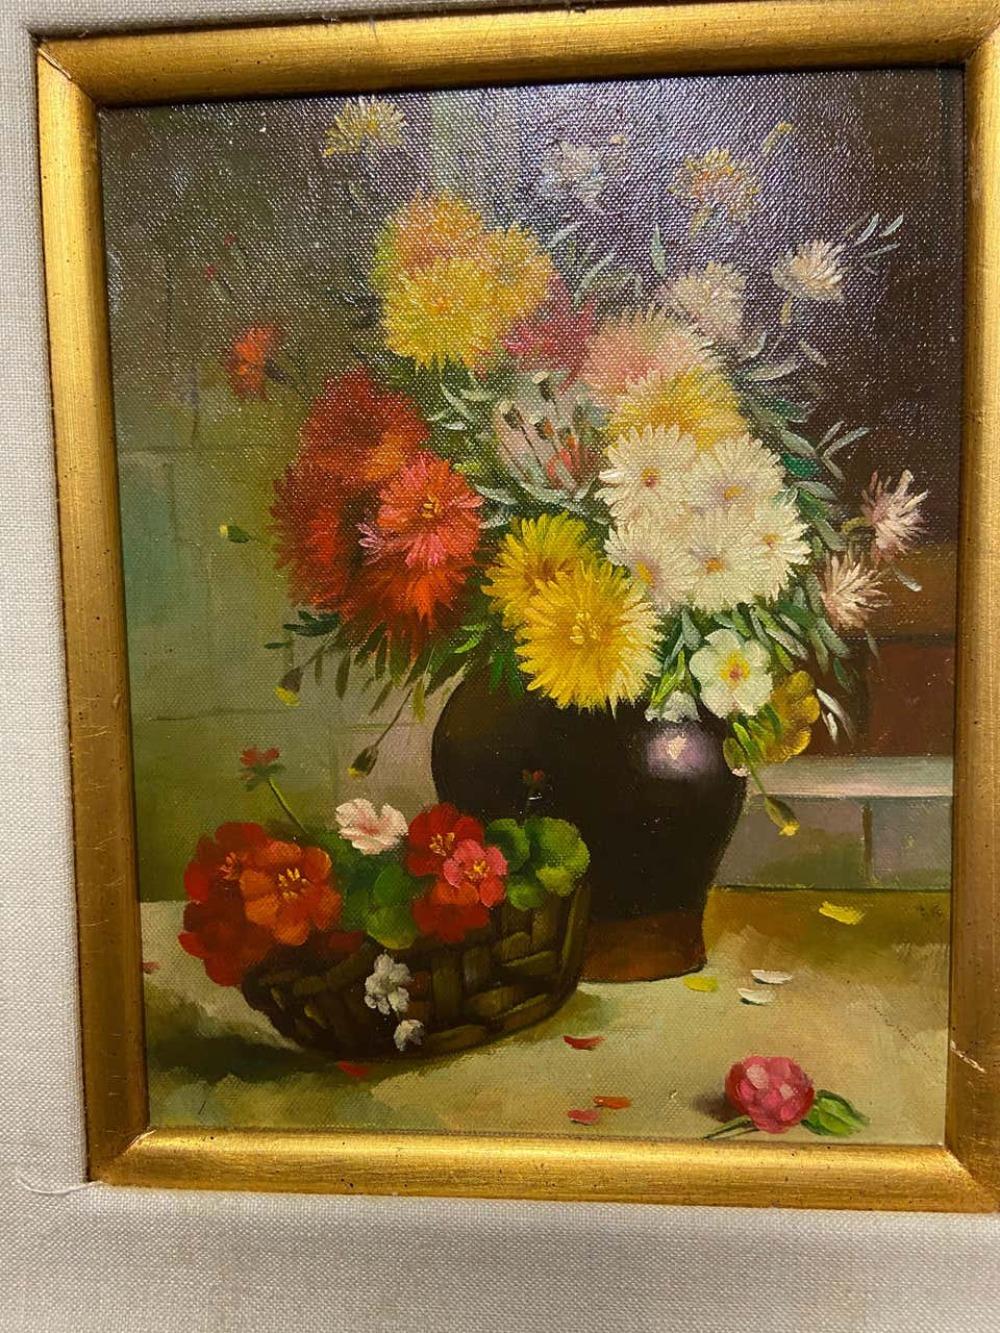 This is an oil on canvas painting depicting a still life with flowers. The piece was made in the 1980s. 

Framed: 21.5